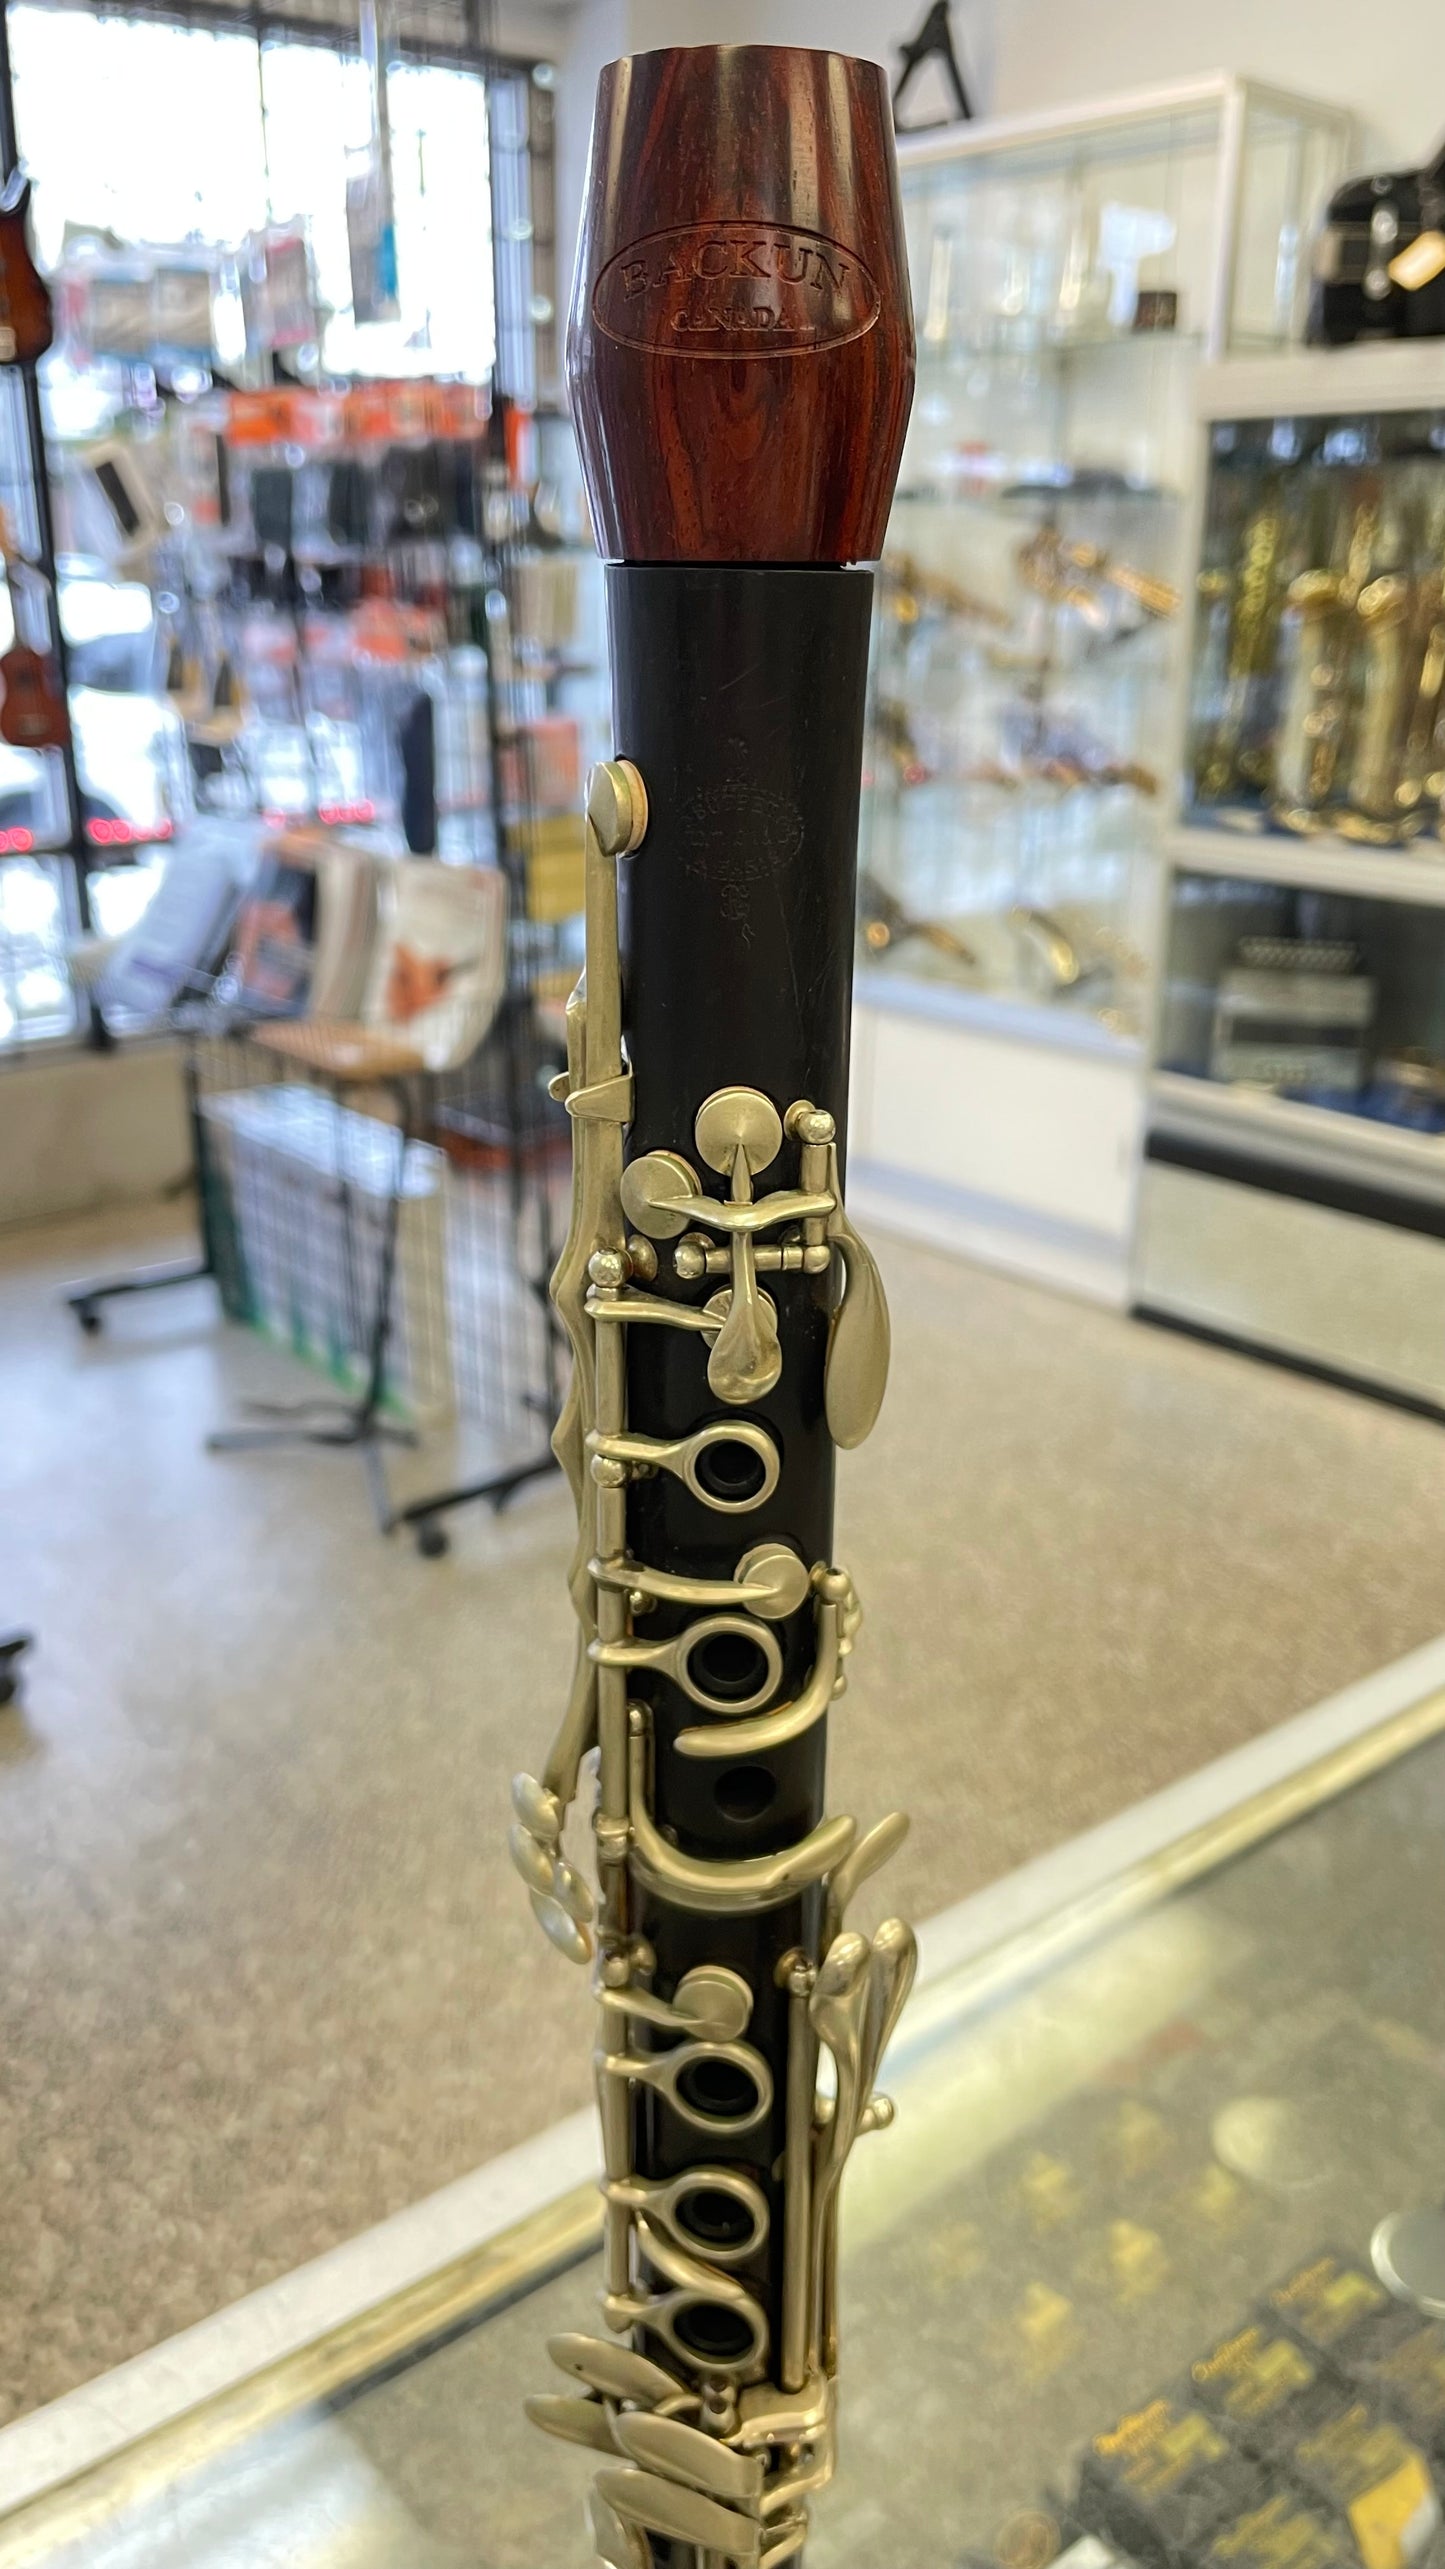 Pre-Owned Buffet C Clarinet